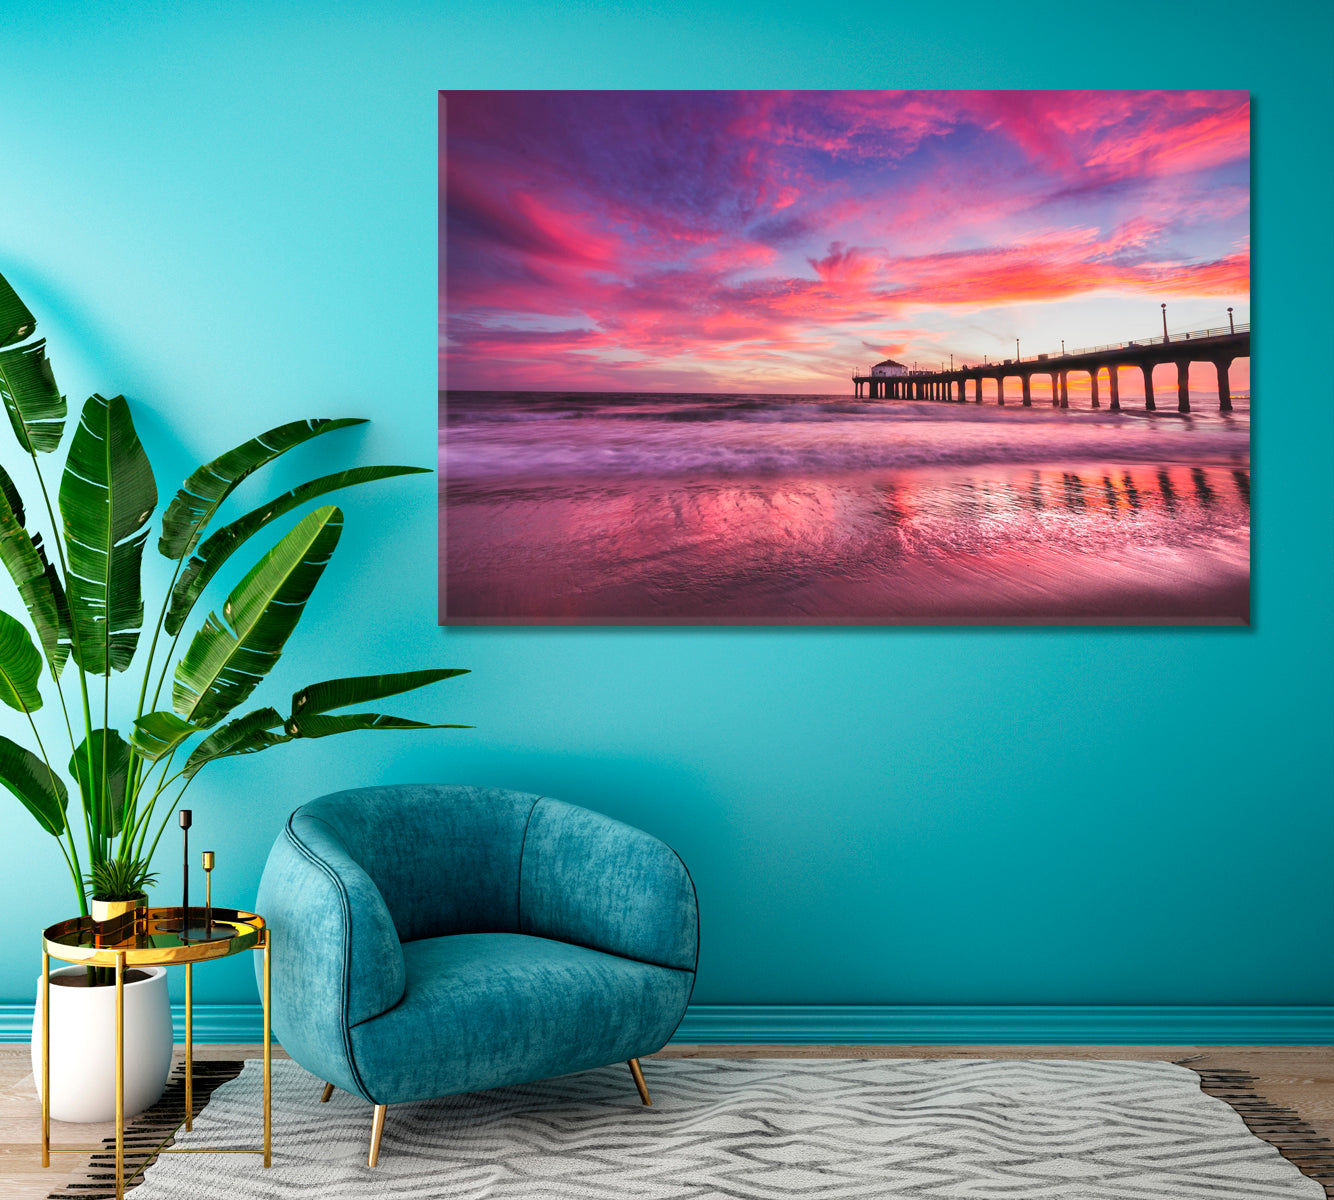 Manhattan Beach Pier with Colorful Sunset Canvas Print ArtLexy 1 Panel 24"x16" inches 